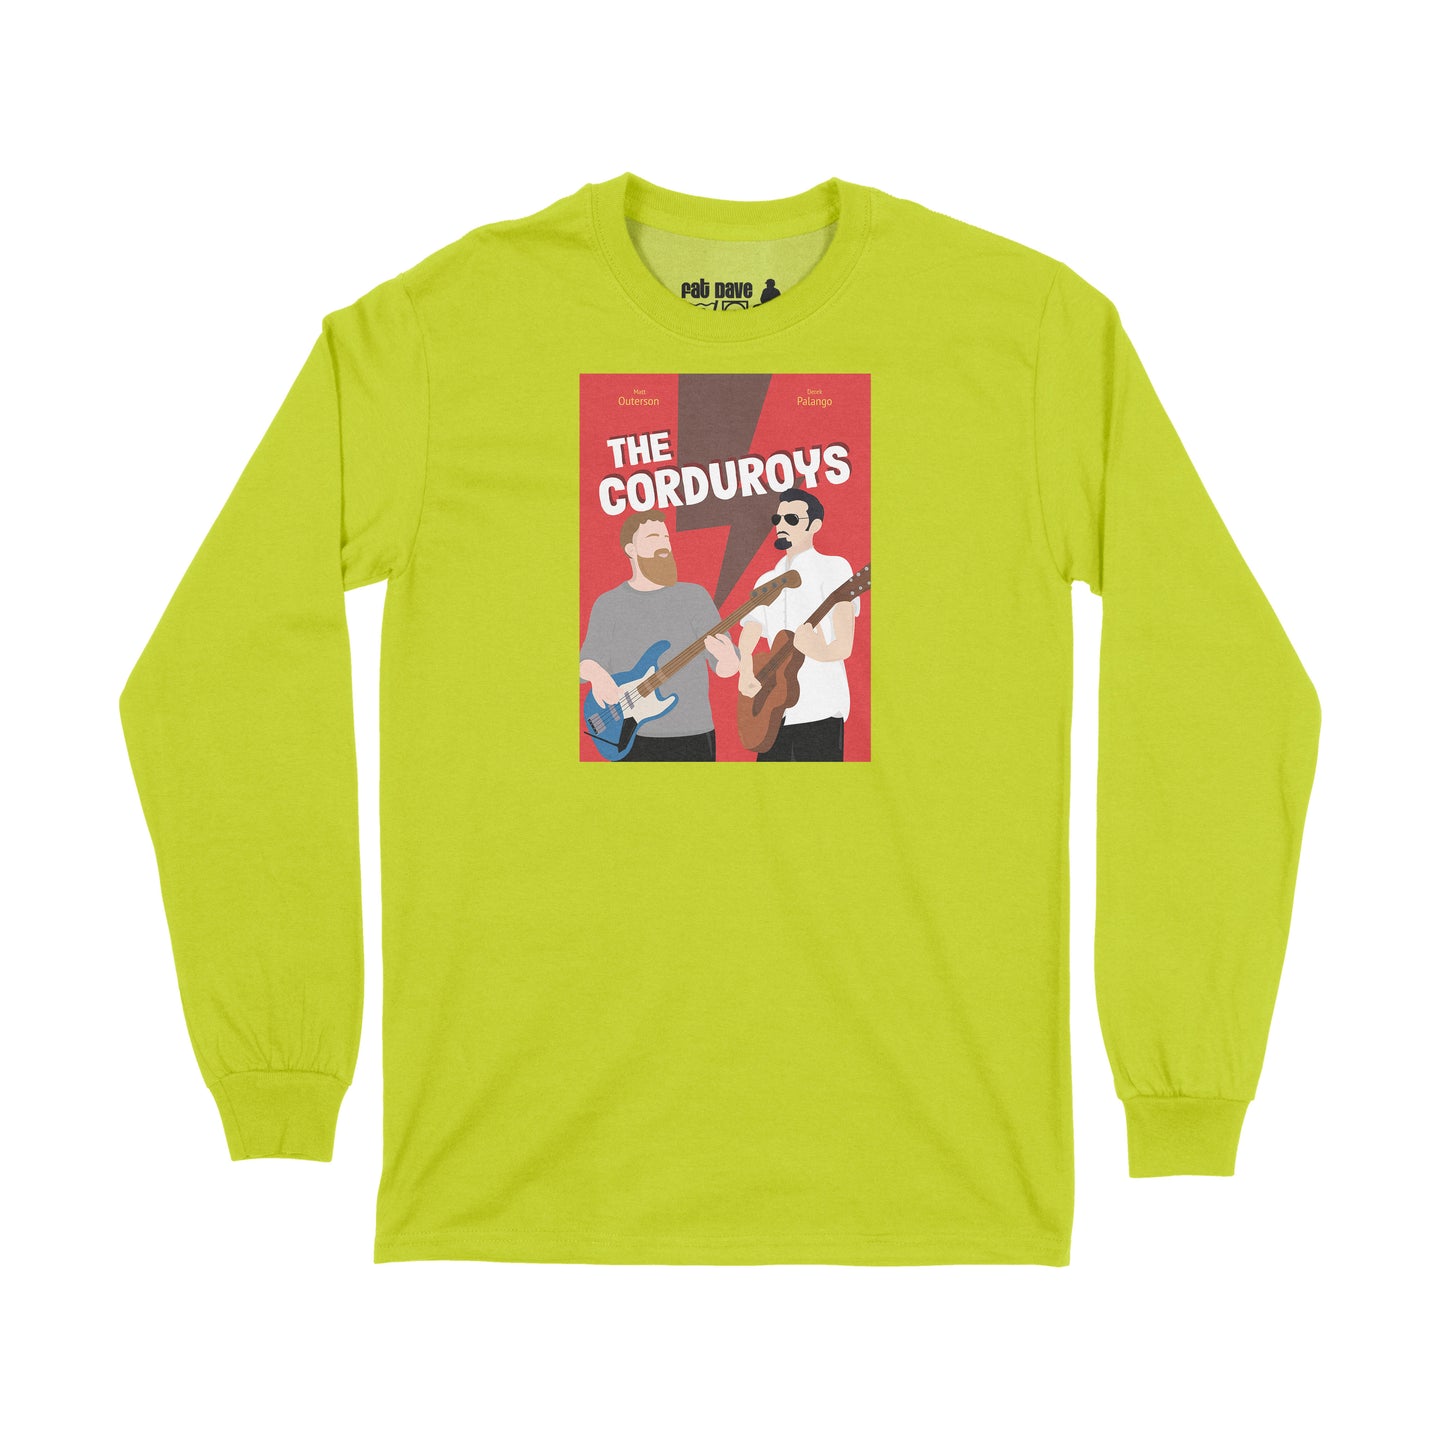 Brantford, Fat Dave, Long Sleeve T-Shirt, Musician, Poster, The Corduroys, Safety Green